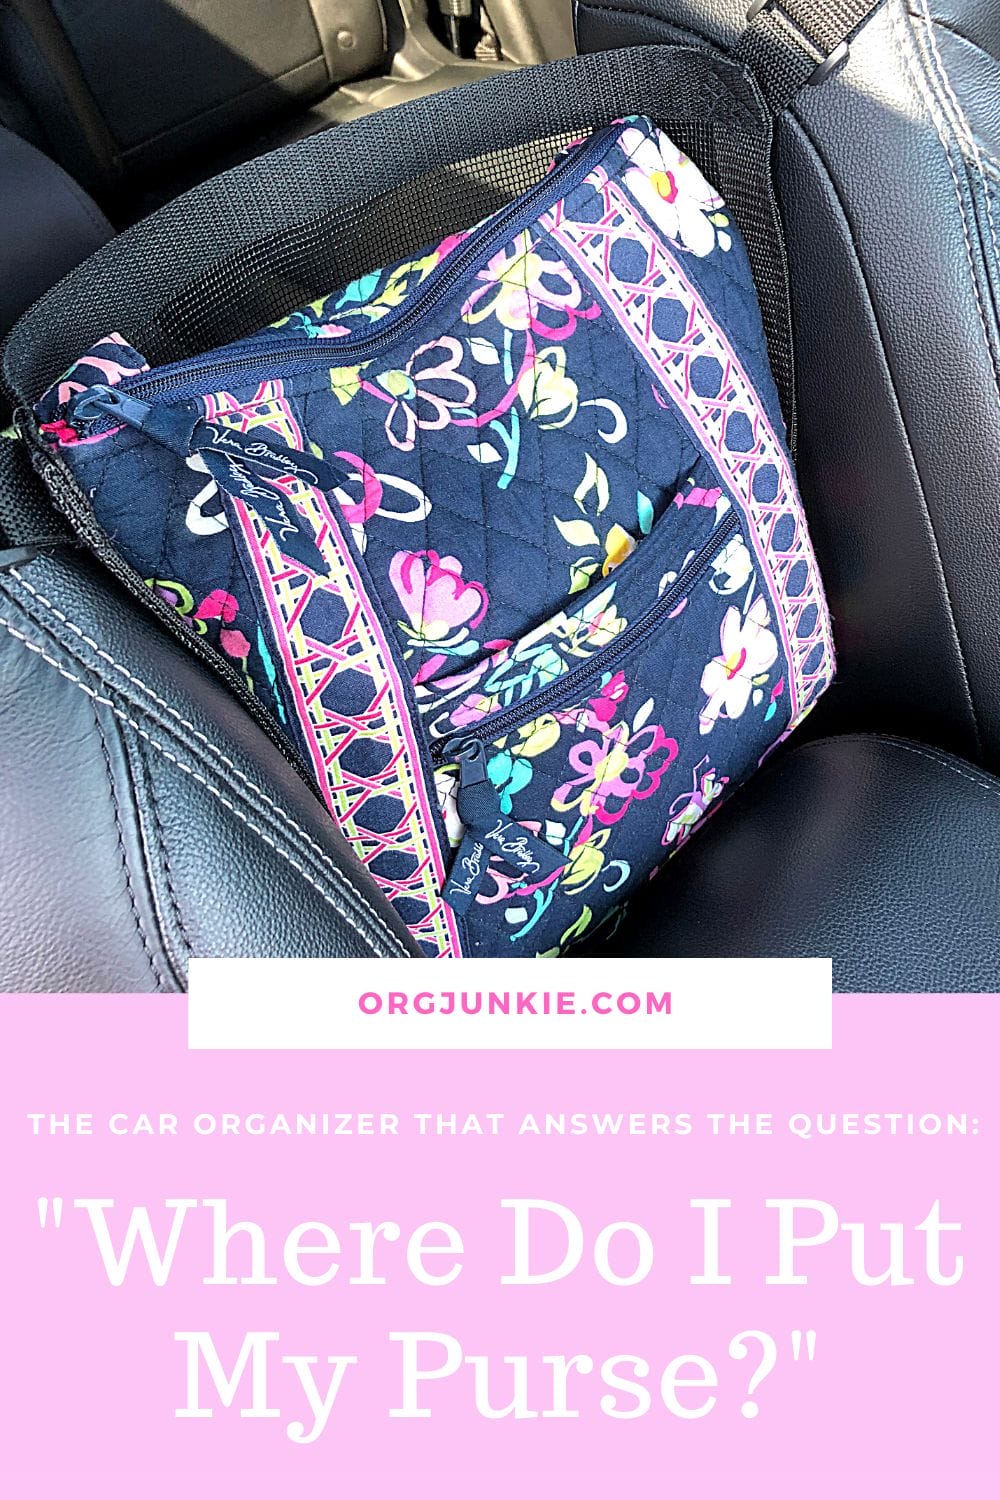 Car Caché ~ The Car Organizer That Answers the Question "Where Do I Put My Purse?" at I'm an Organizing Junkie blog